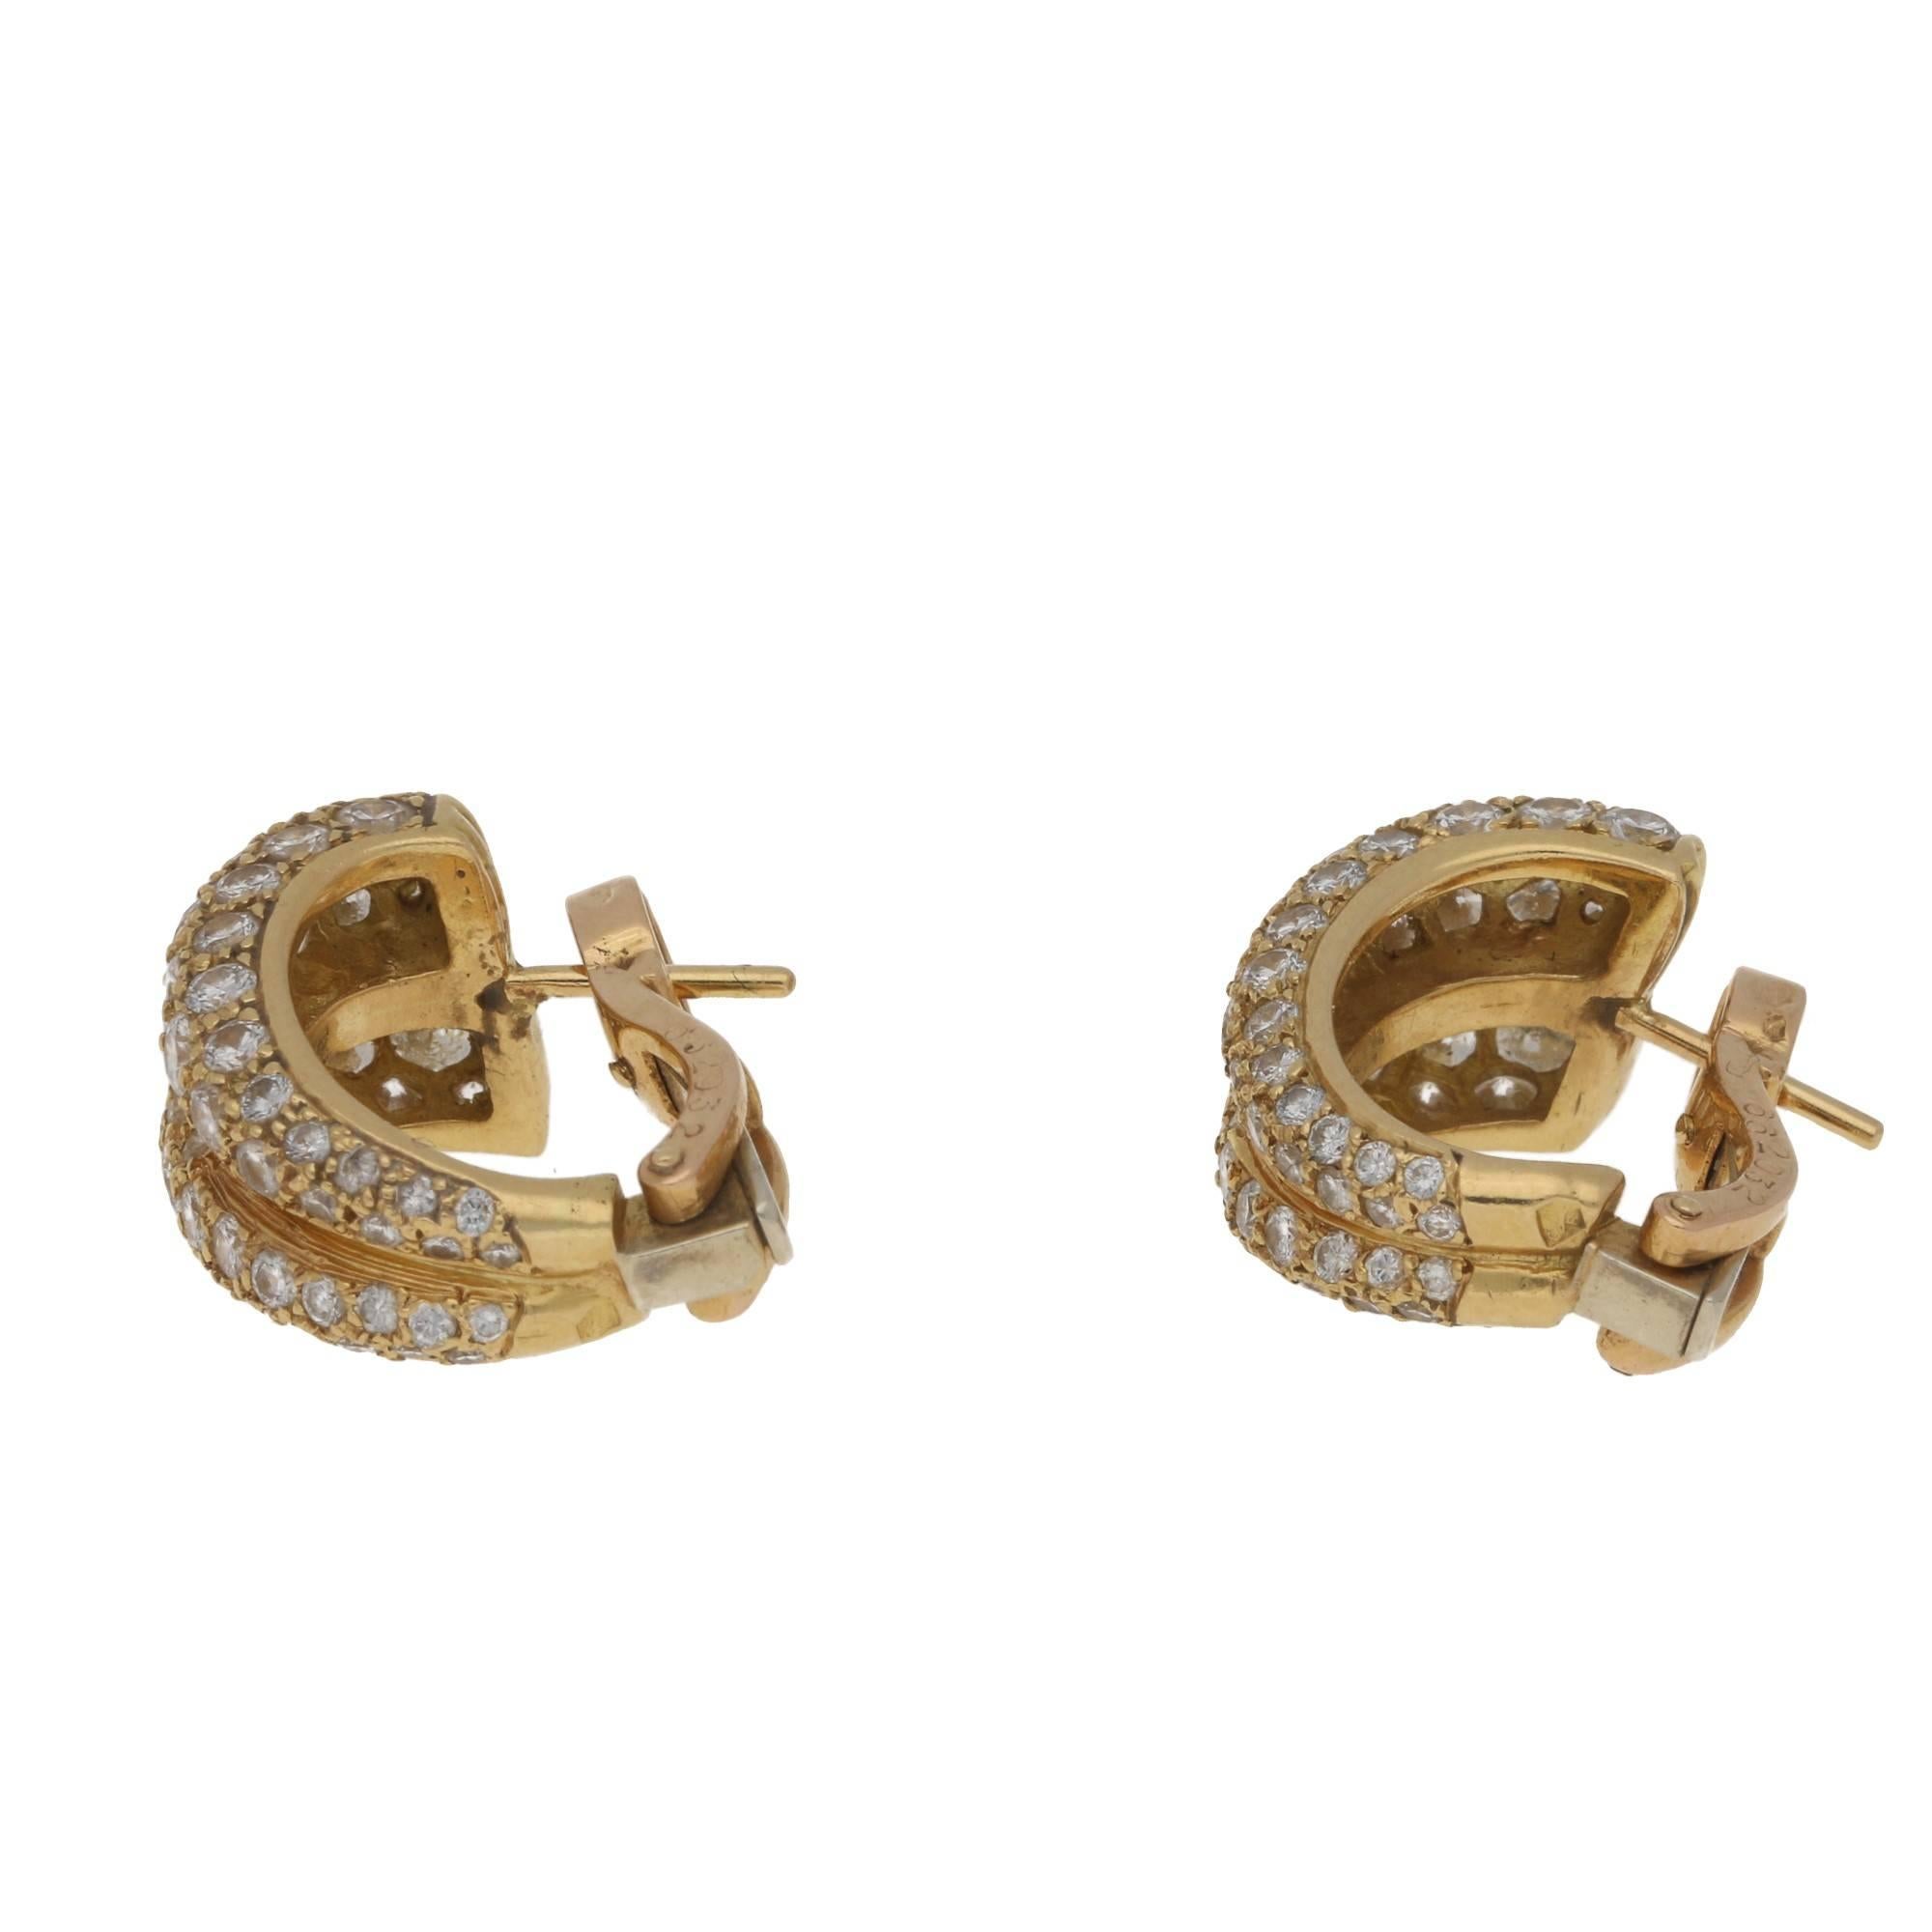 These  fabulous earrings by Cartier feature a double hoop design set with round brilliant cut diamonds. The diamonds totaling approximately 2.30ct, estimated colour E-F and clarity VVS. These are made in 18k yellow gold. These come with their